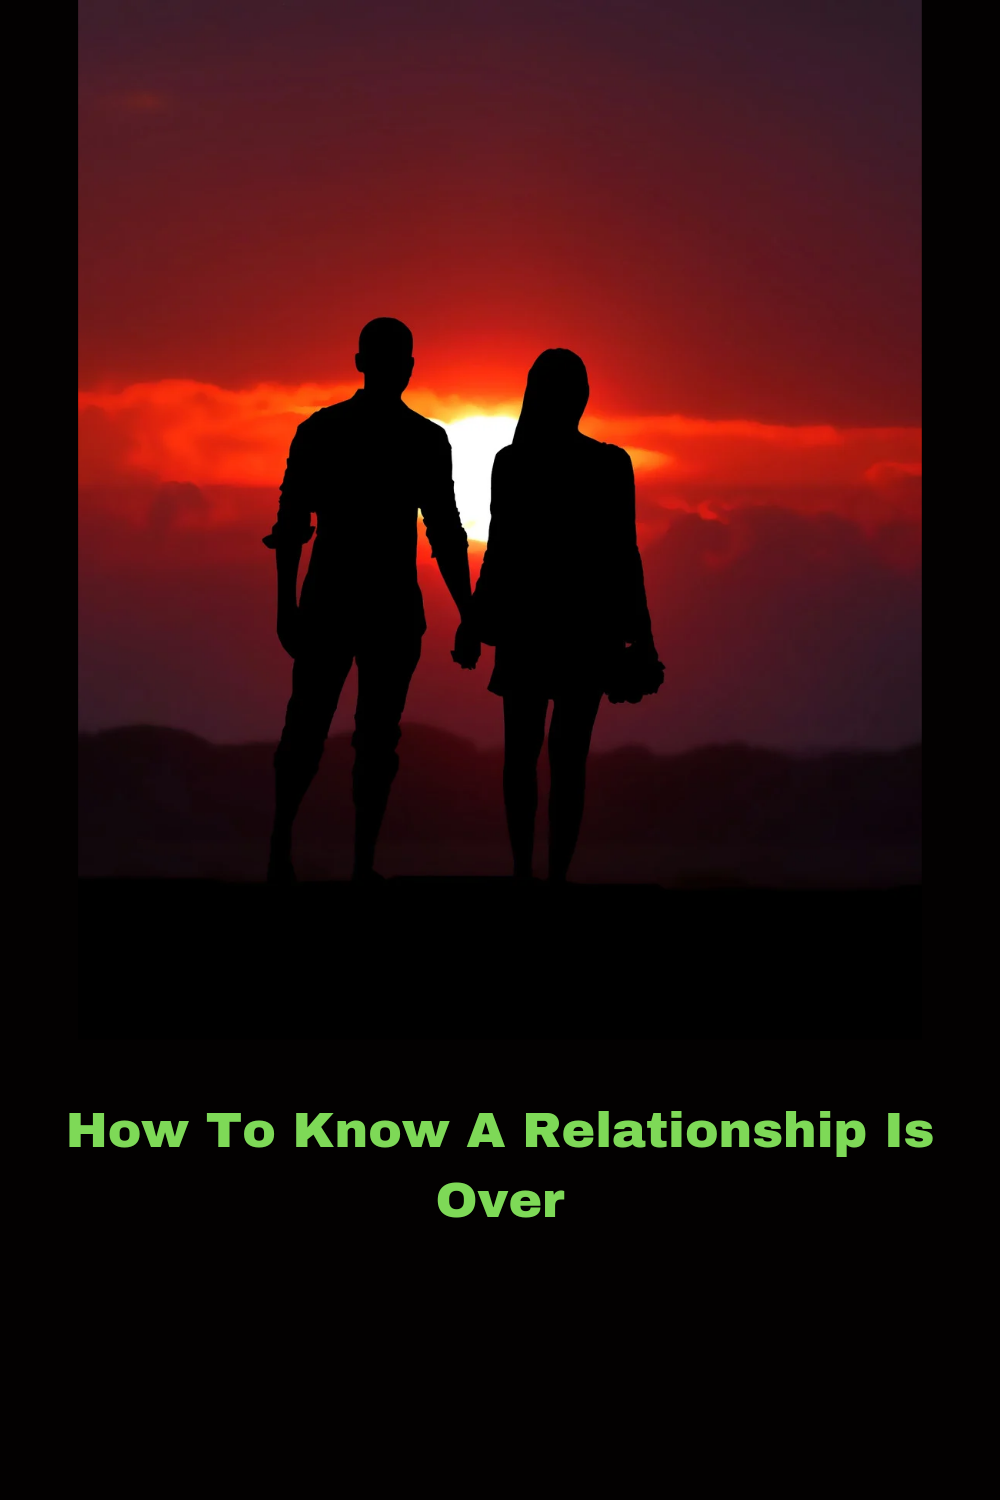 How To Know A Relationship Is Over